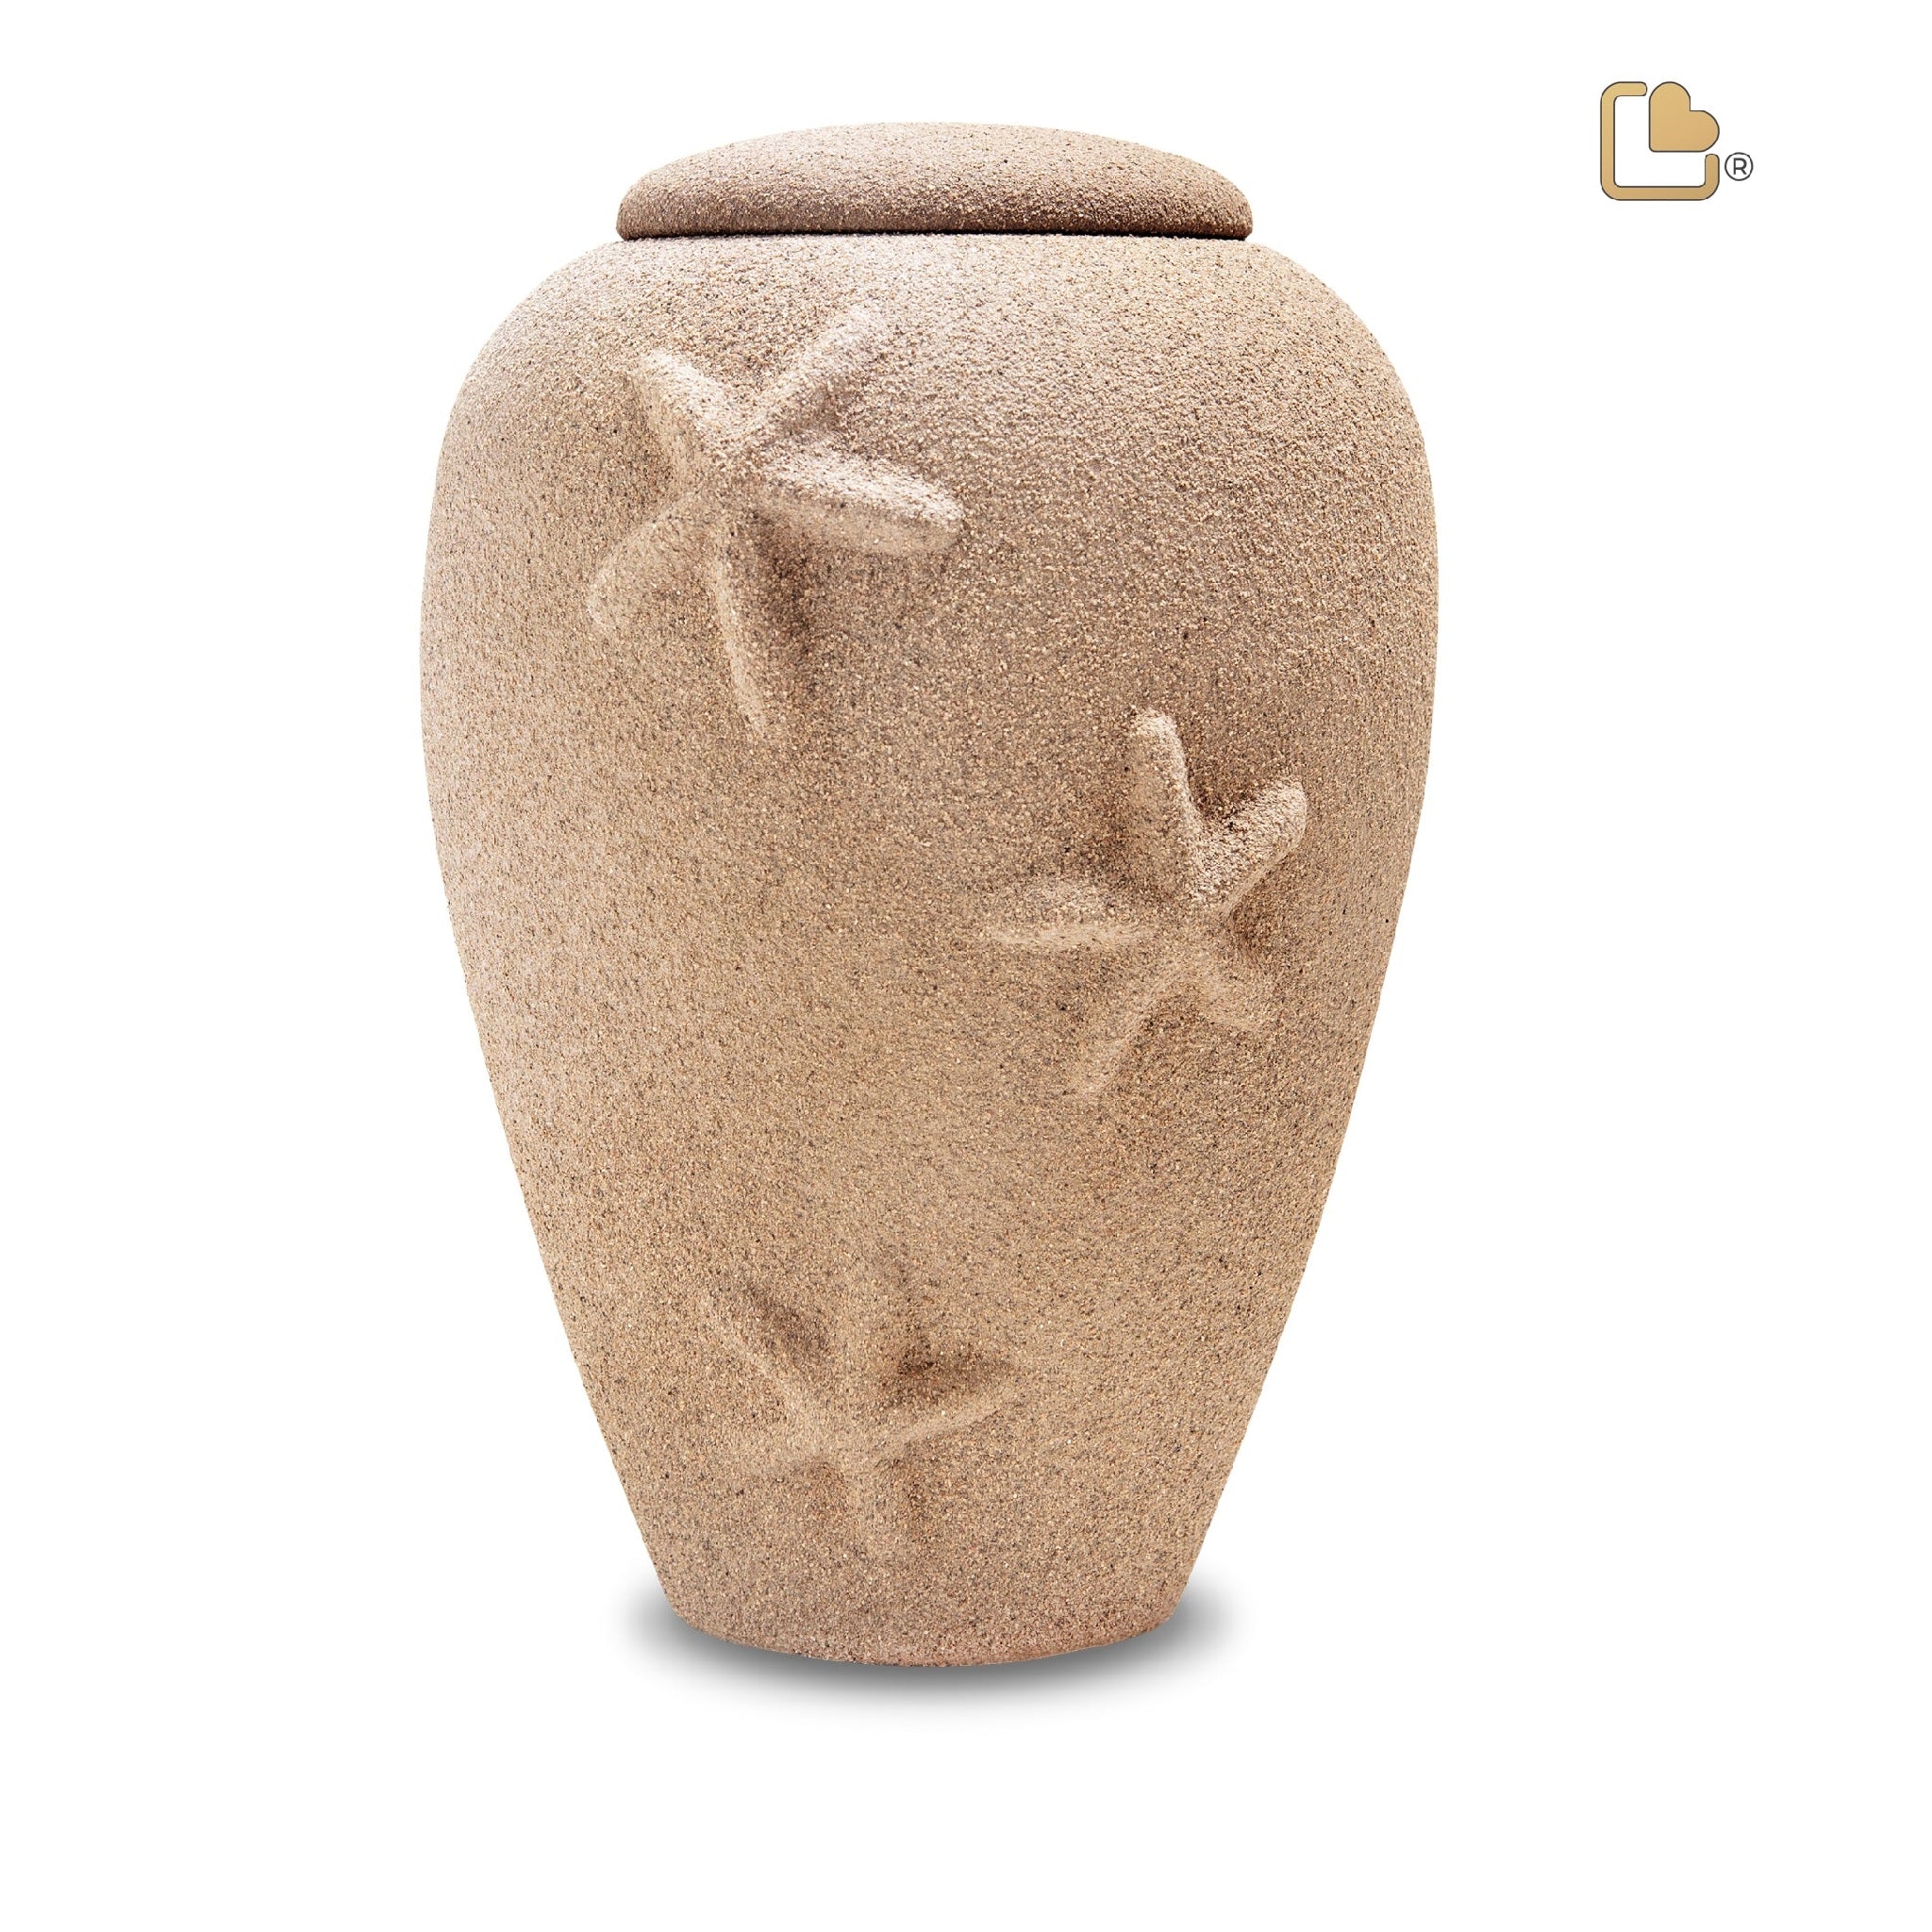 Beach Eco friendly burial urn made from clay and sand